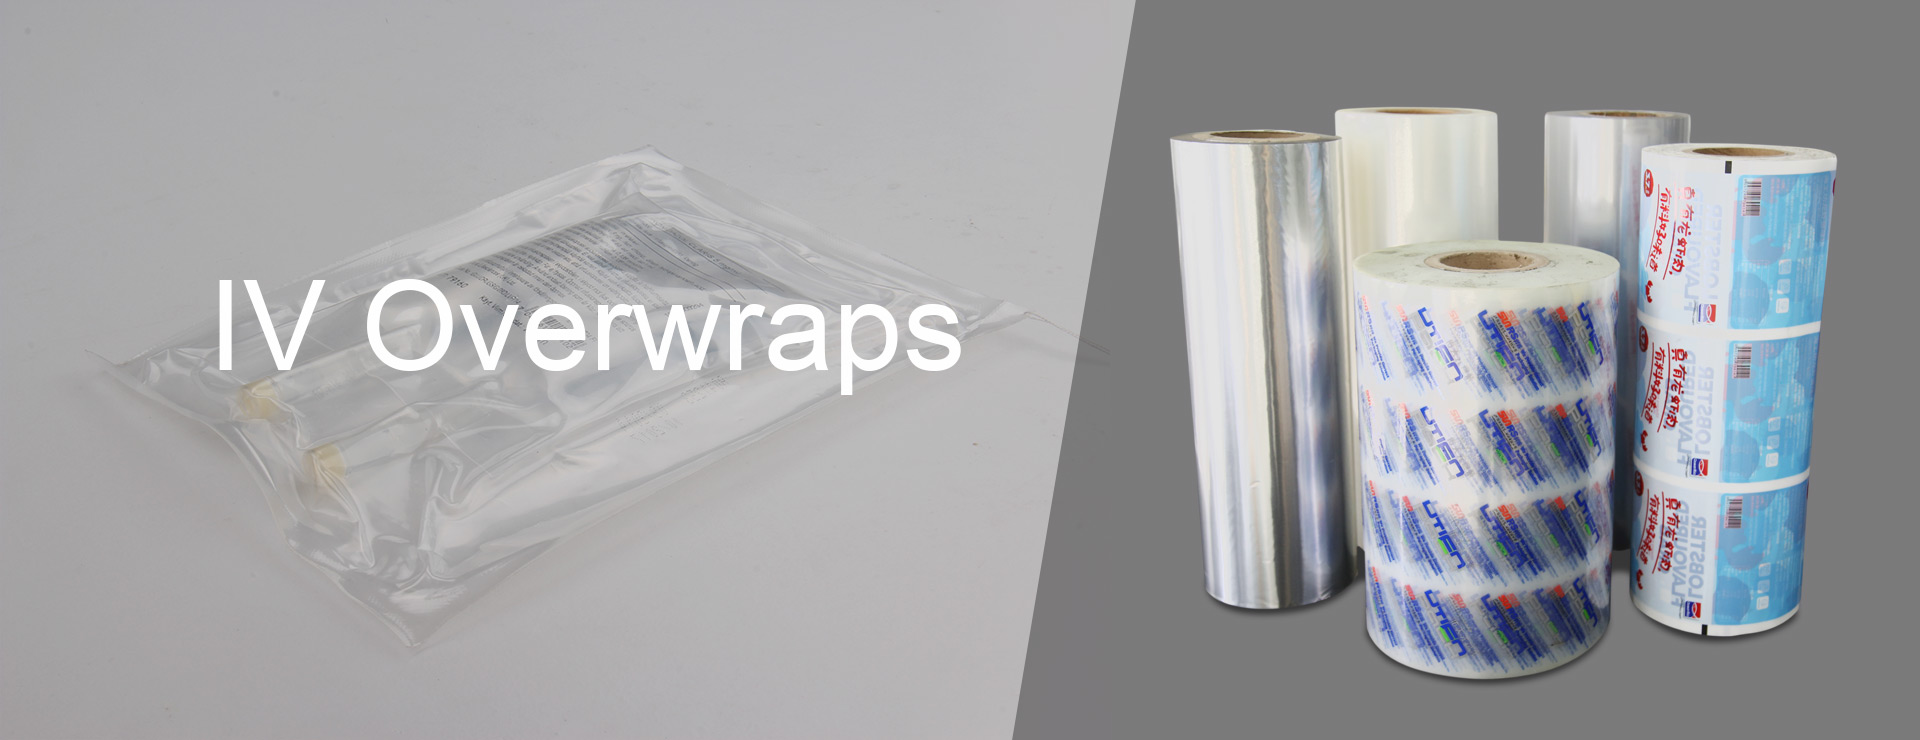 Package material for IV overwraps